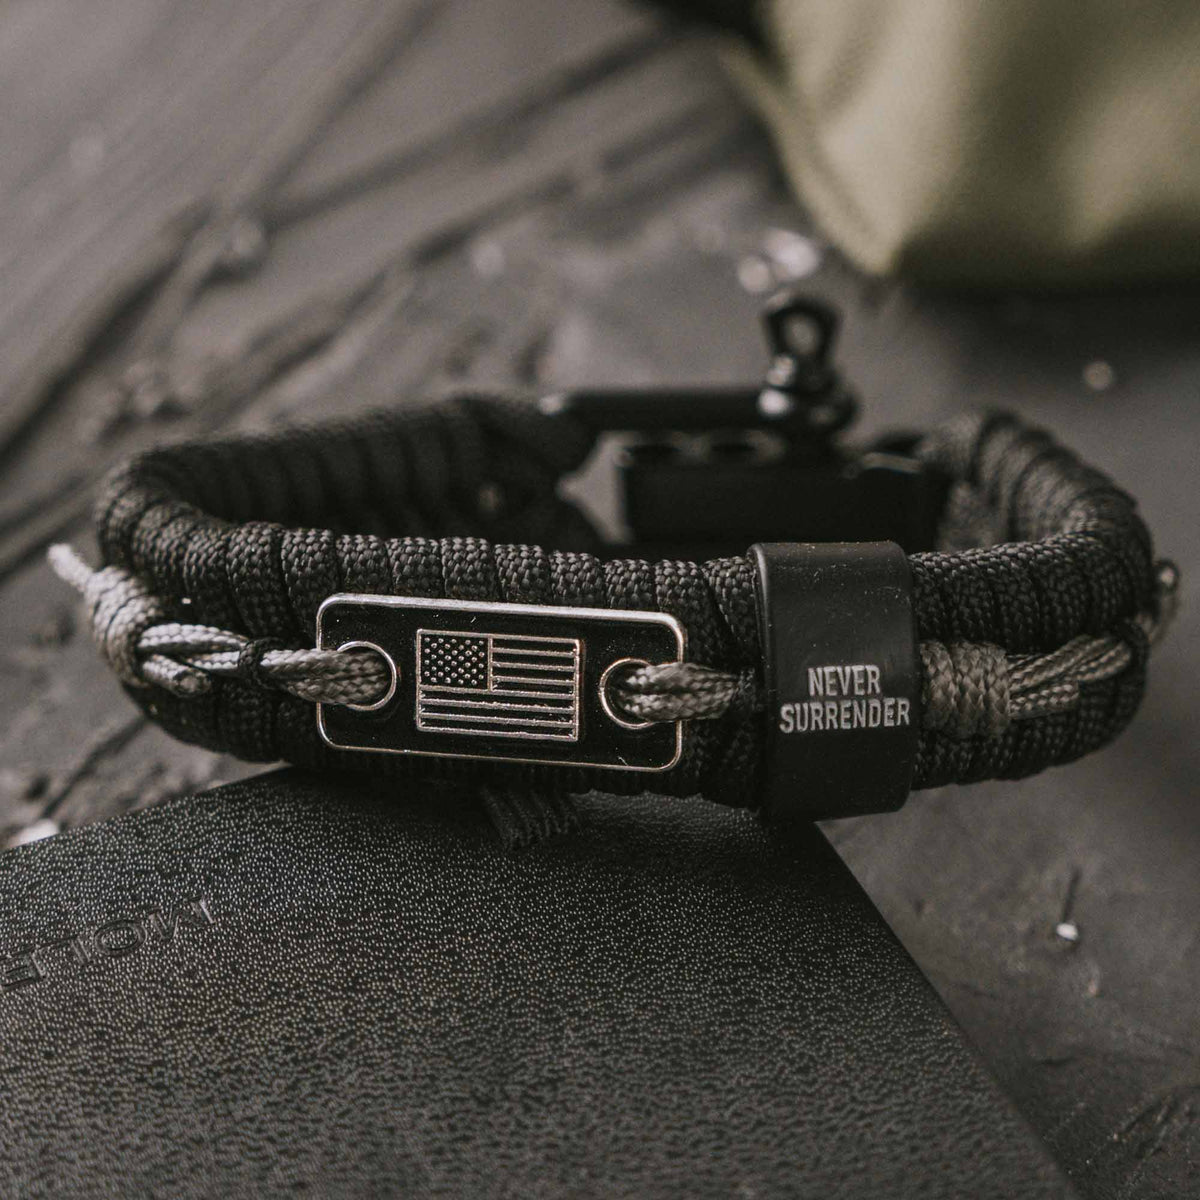 Limited Time Offer - Band Of Brothers Never Surrender Barbed Wire Paracord  Bracelets - Set of 3: Helps Pair Veterans with Service or Shelter Dogs